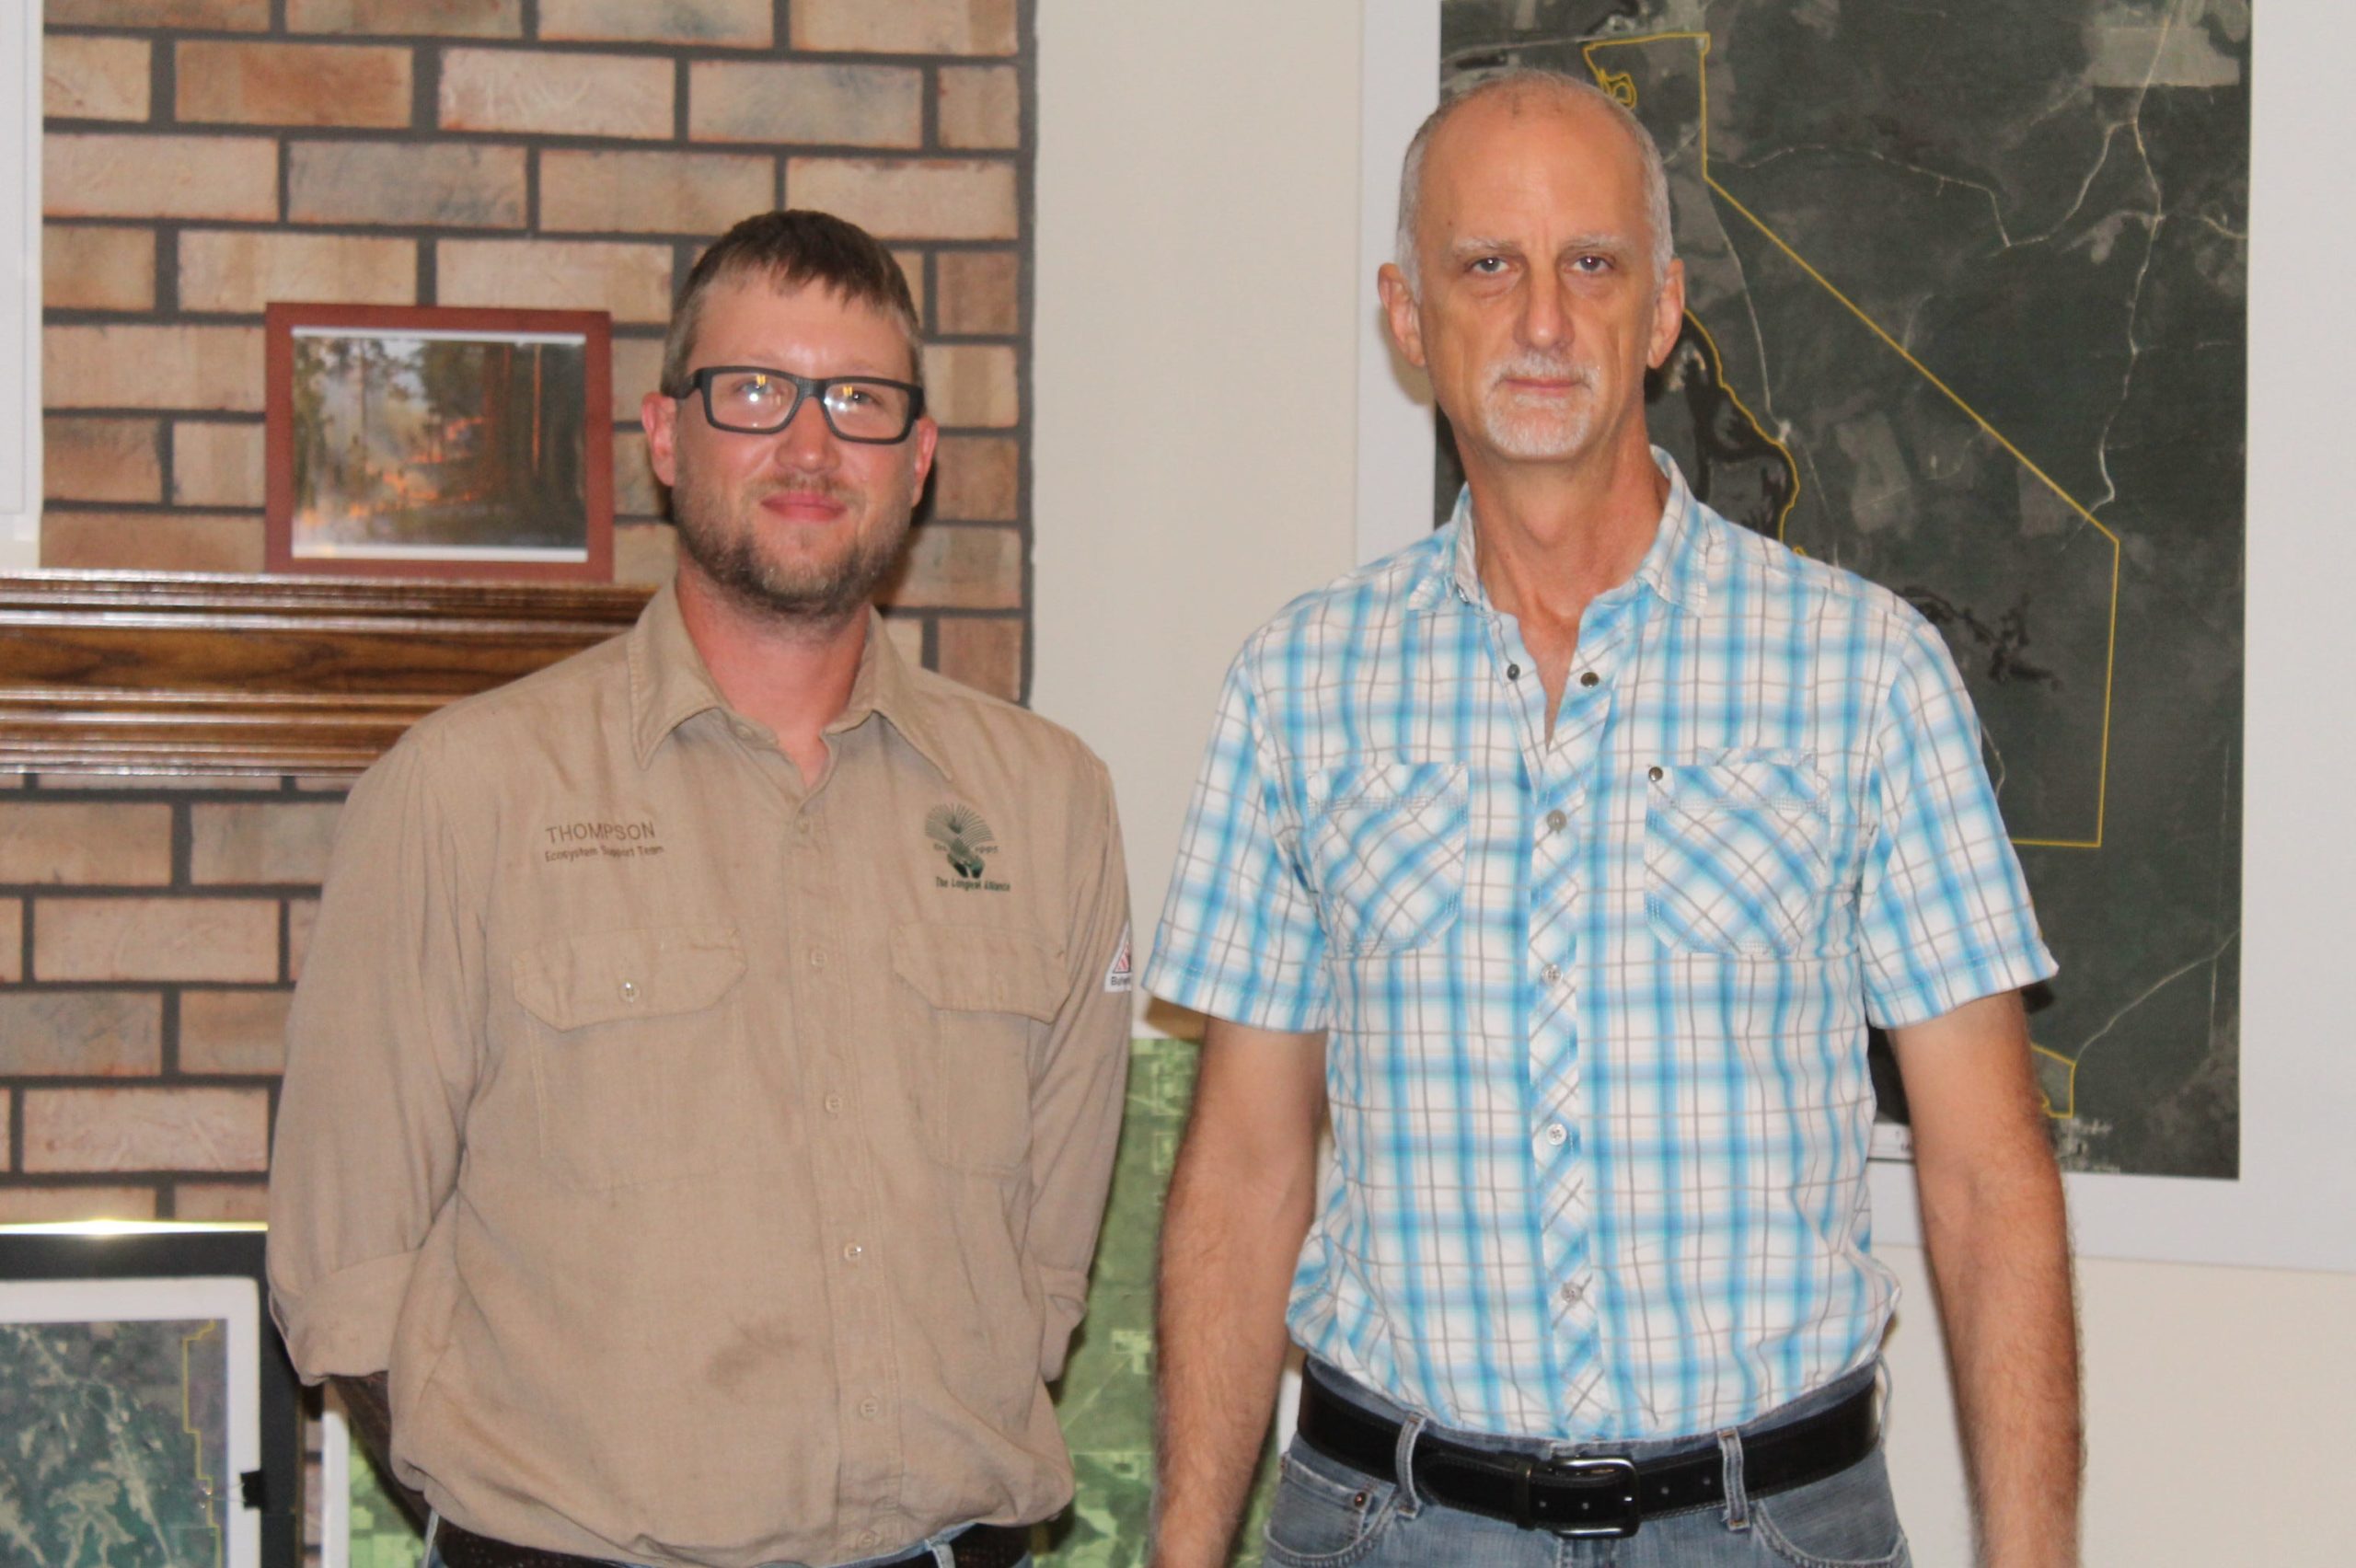 Vernon Compton (right) Gulf Coastal Plain Ecosystem Partnership (GCPEP) director and Mike Thompson, Eco System Support supervisor both work with the conservation group, the Longleaf Alliance, which is headquartered at 8831 Whiting Field Circle.